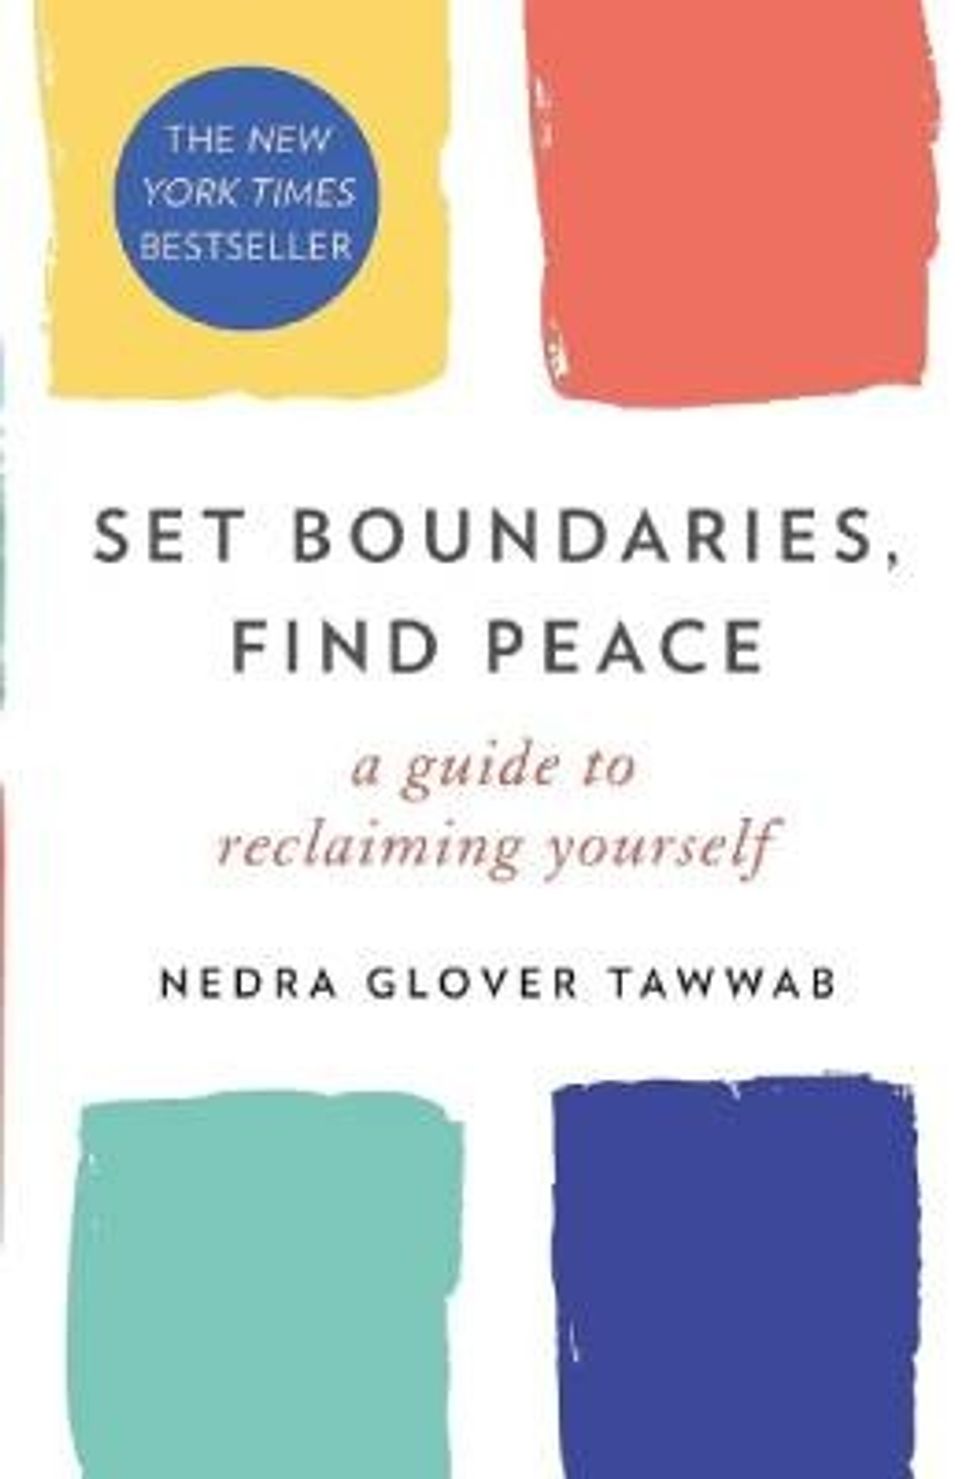 The front cover of the book "Set Boundaries, Find Peace" by Nedra Glover Tawwab